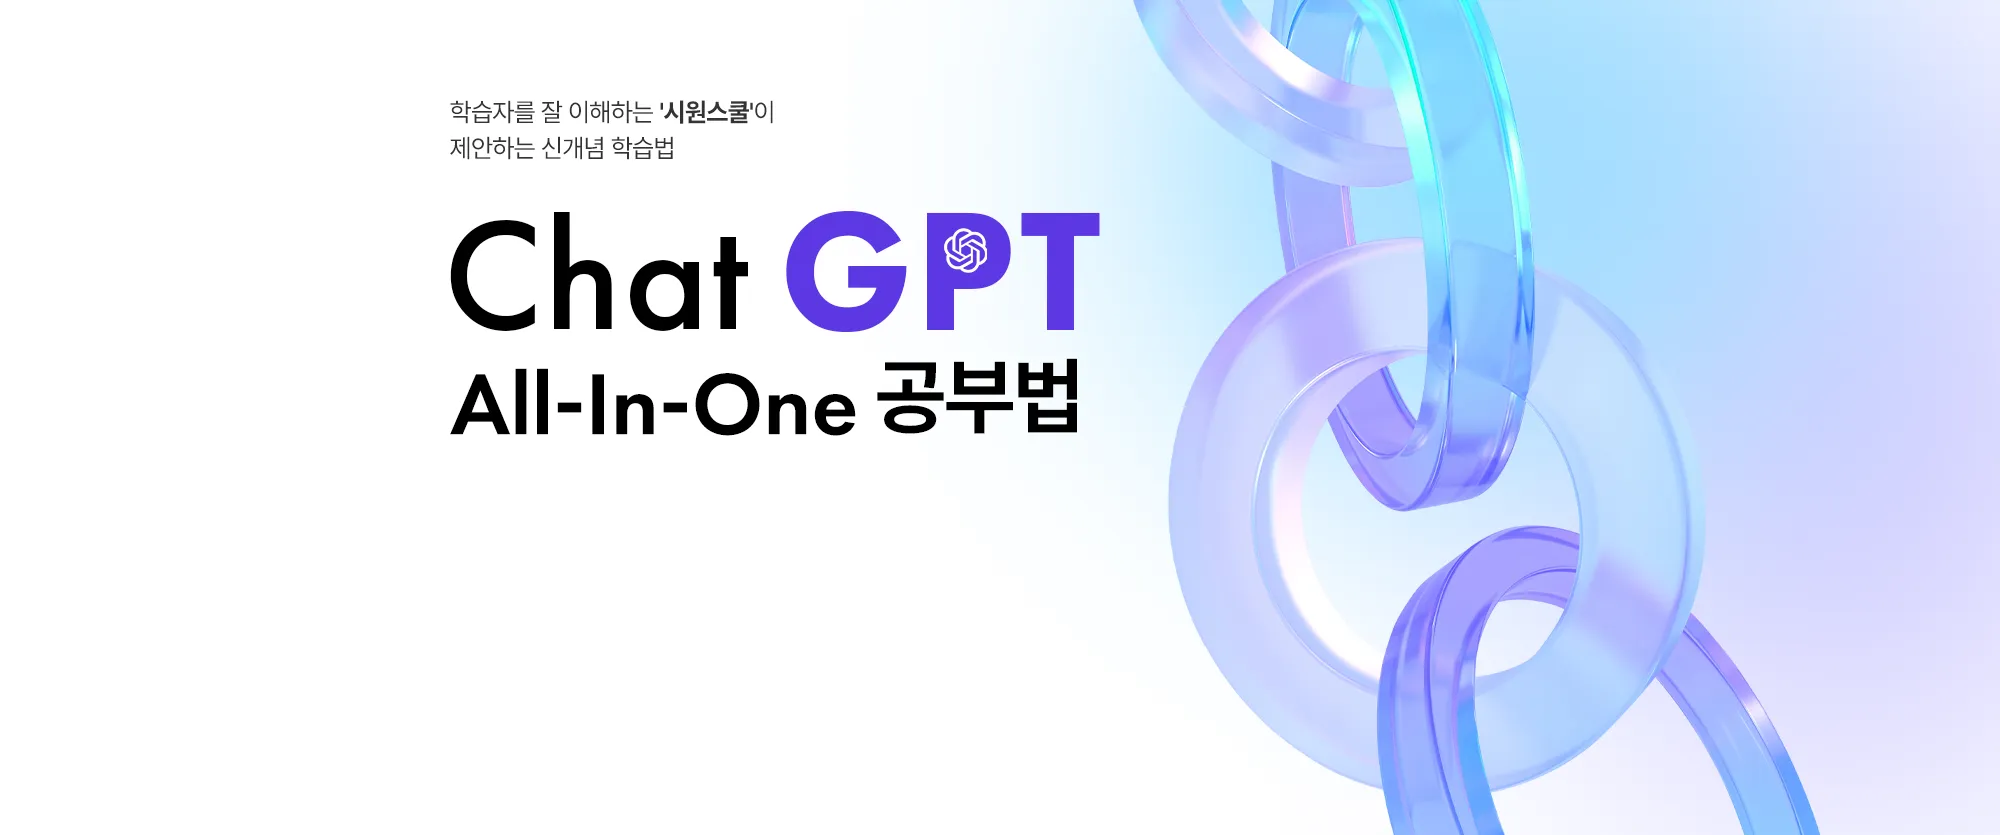 chat gpt all-in-one 공부법